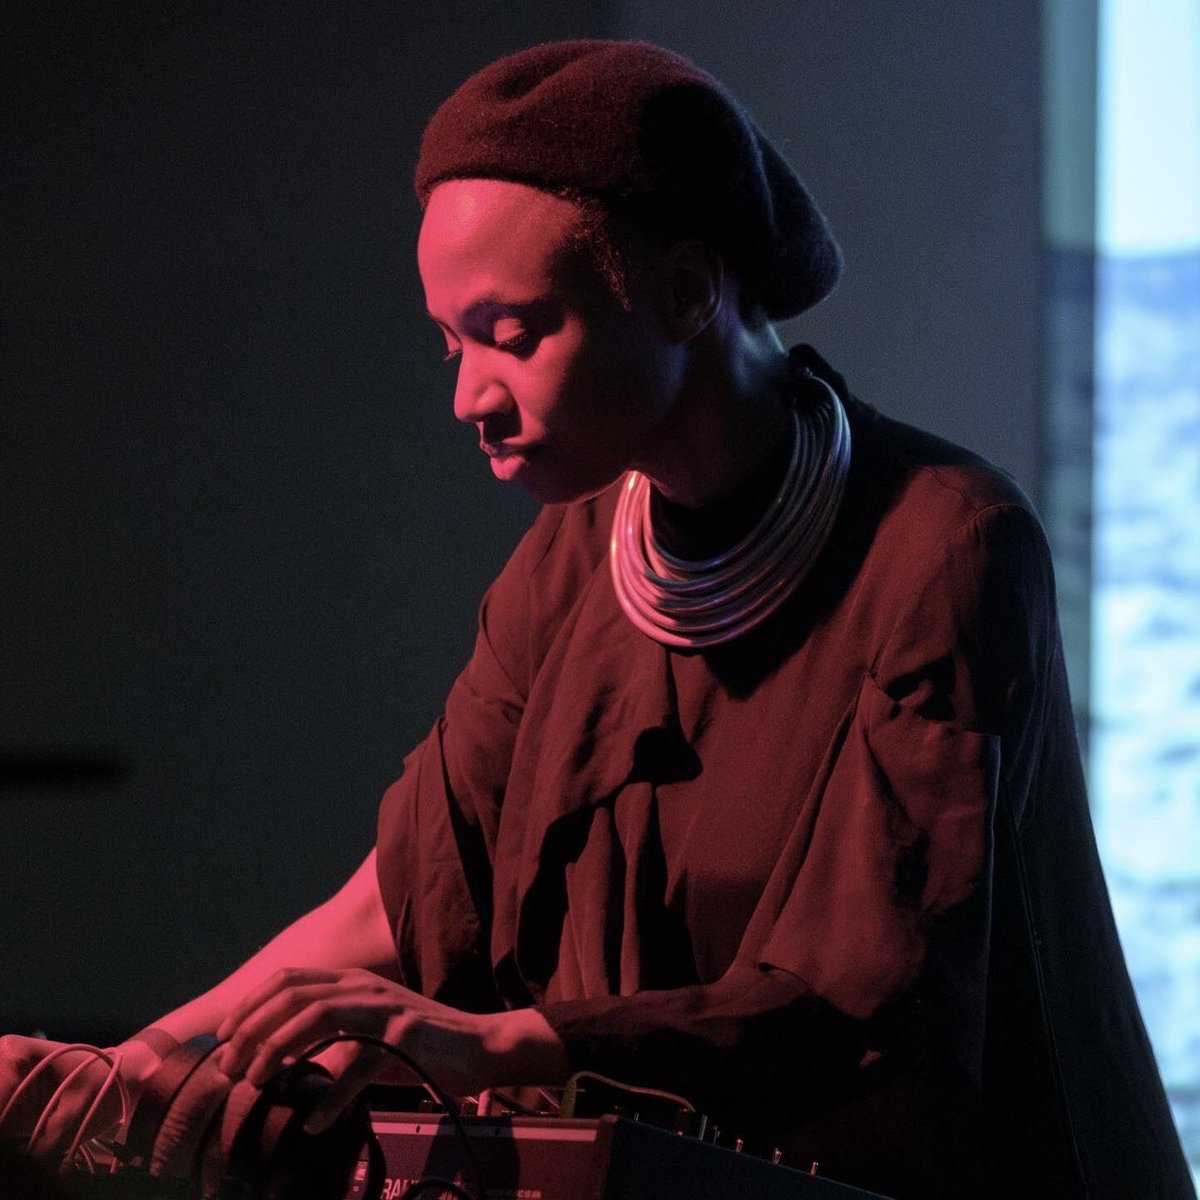 Composer, sound designer & interdisciplinary artist @venusexmachina has contributed sounds and music to a range of projects. She has also engaged in teaching workshops on music production and creative coding. Applications for the Oram Awards are now open oramawards.com